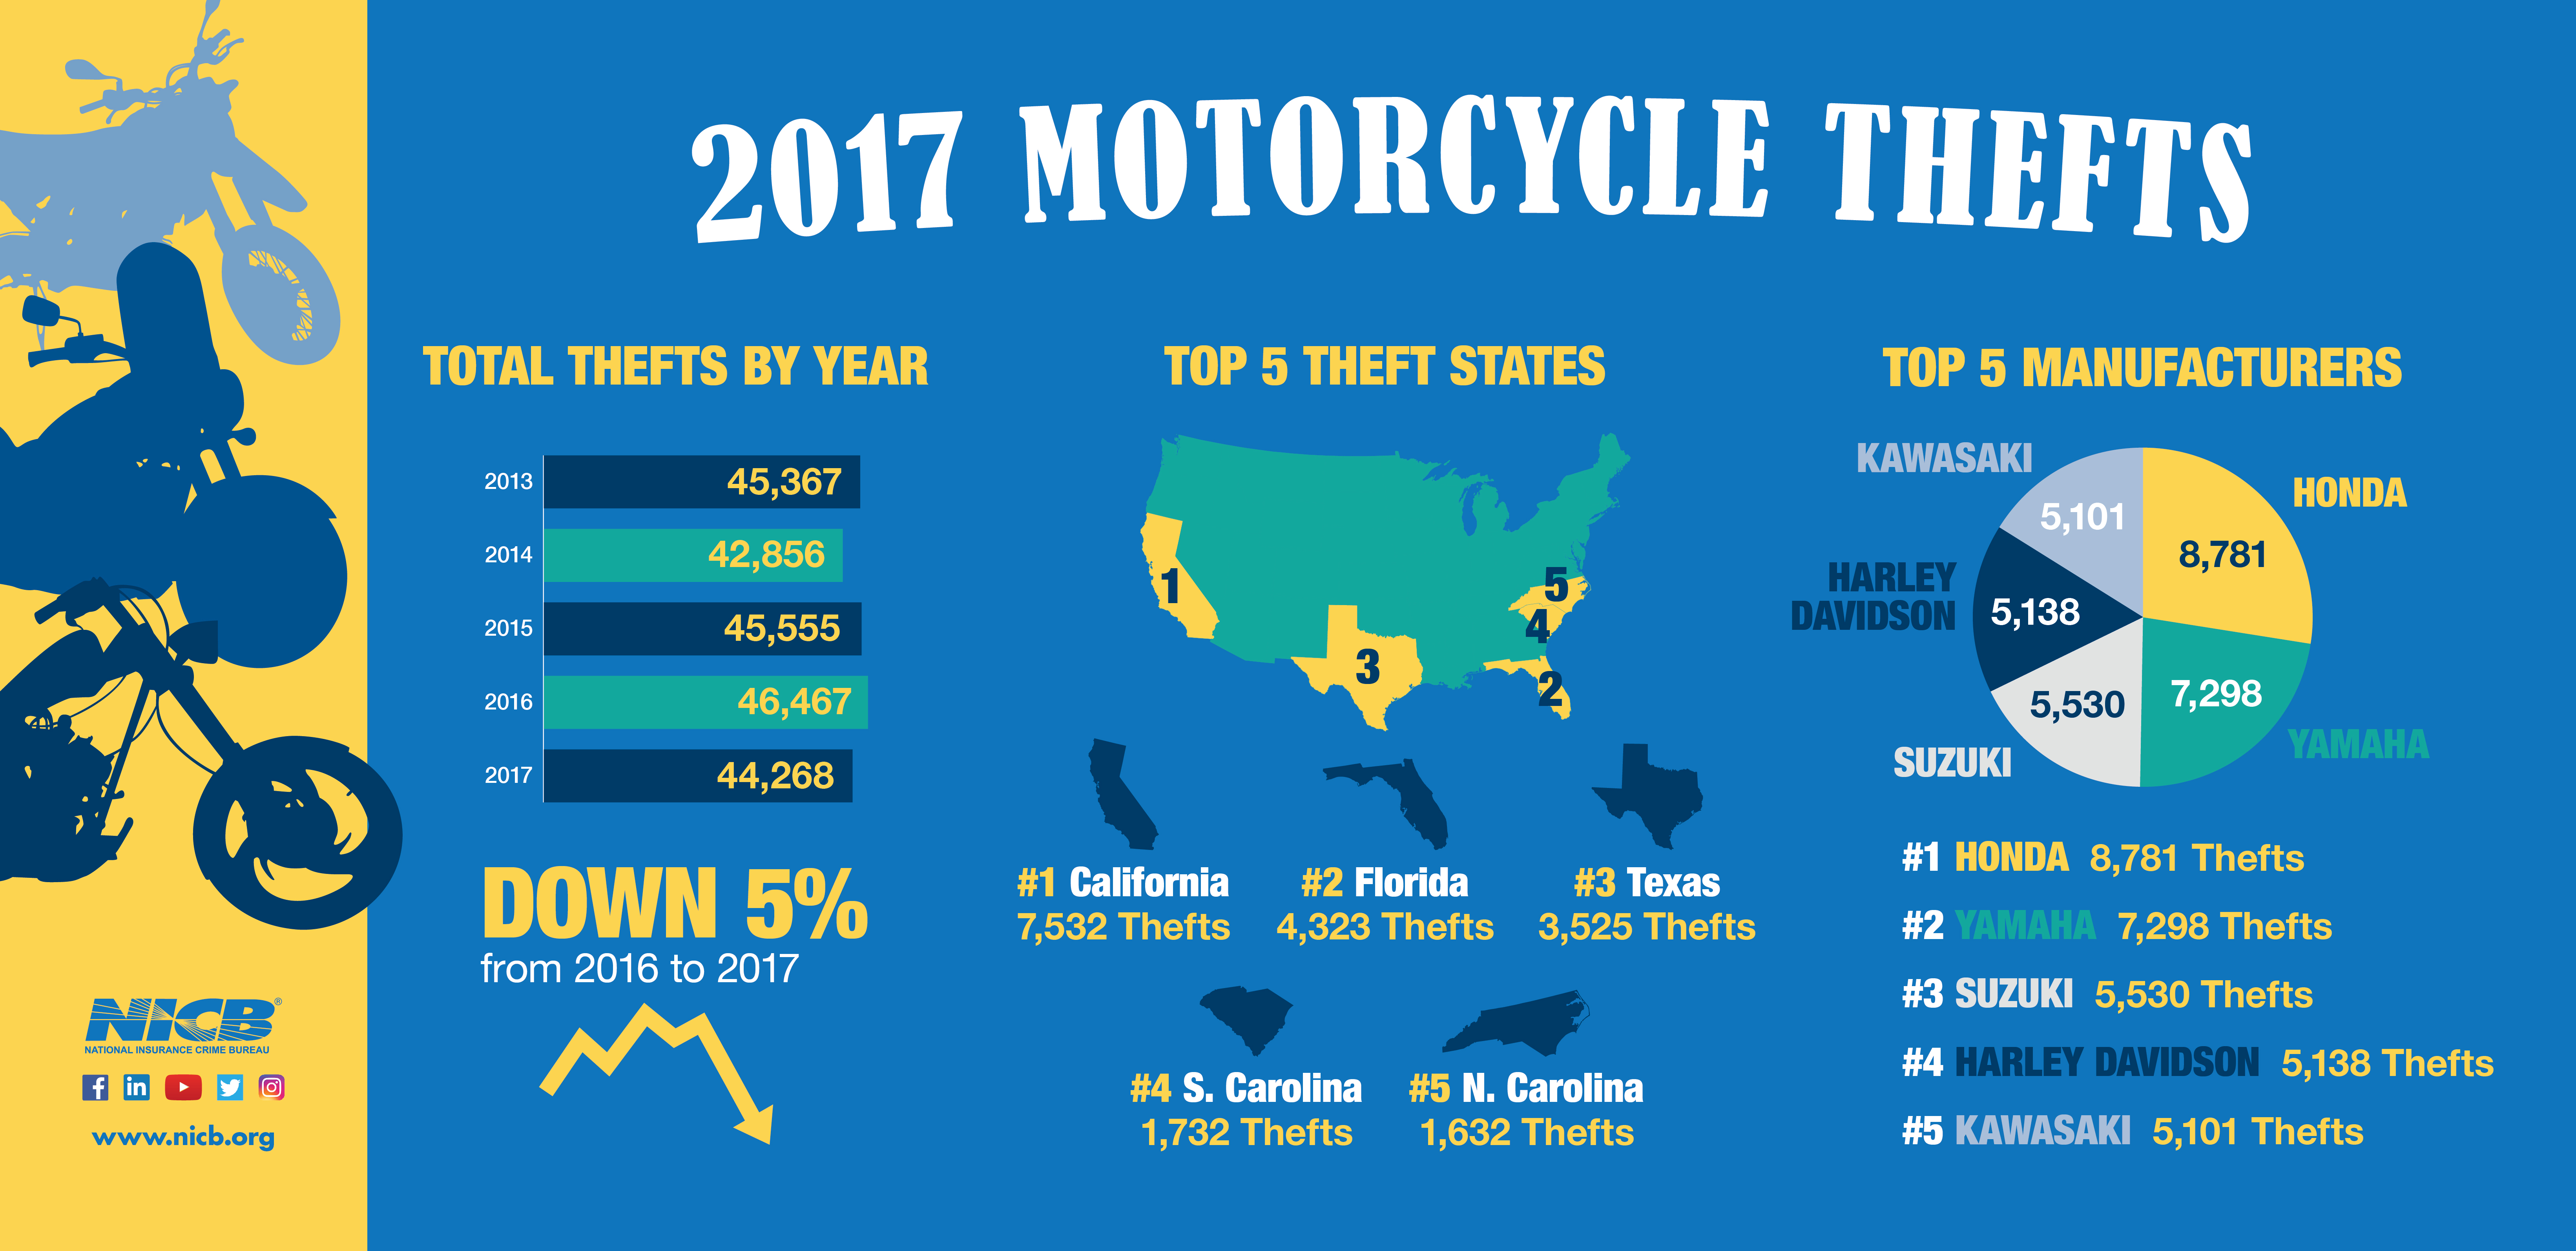 2017 Motorcycle Theft Infographic